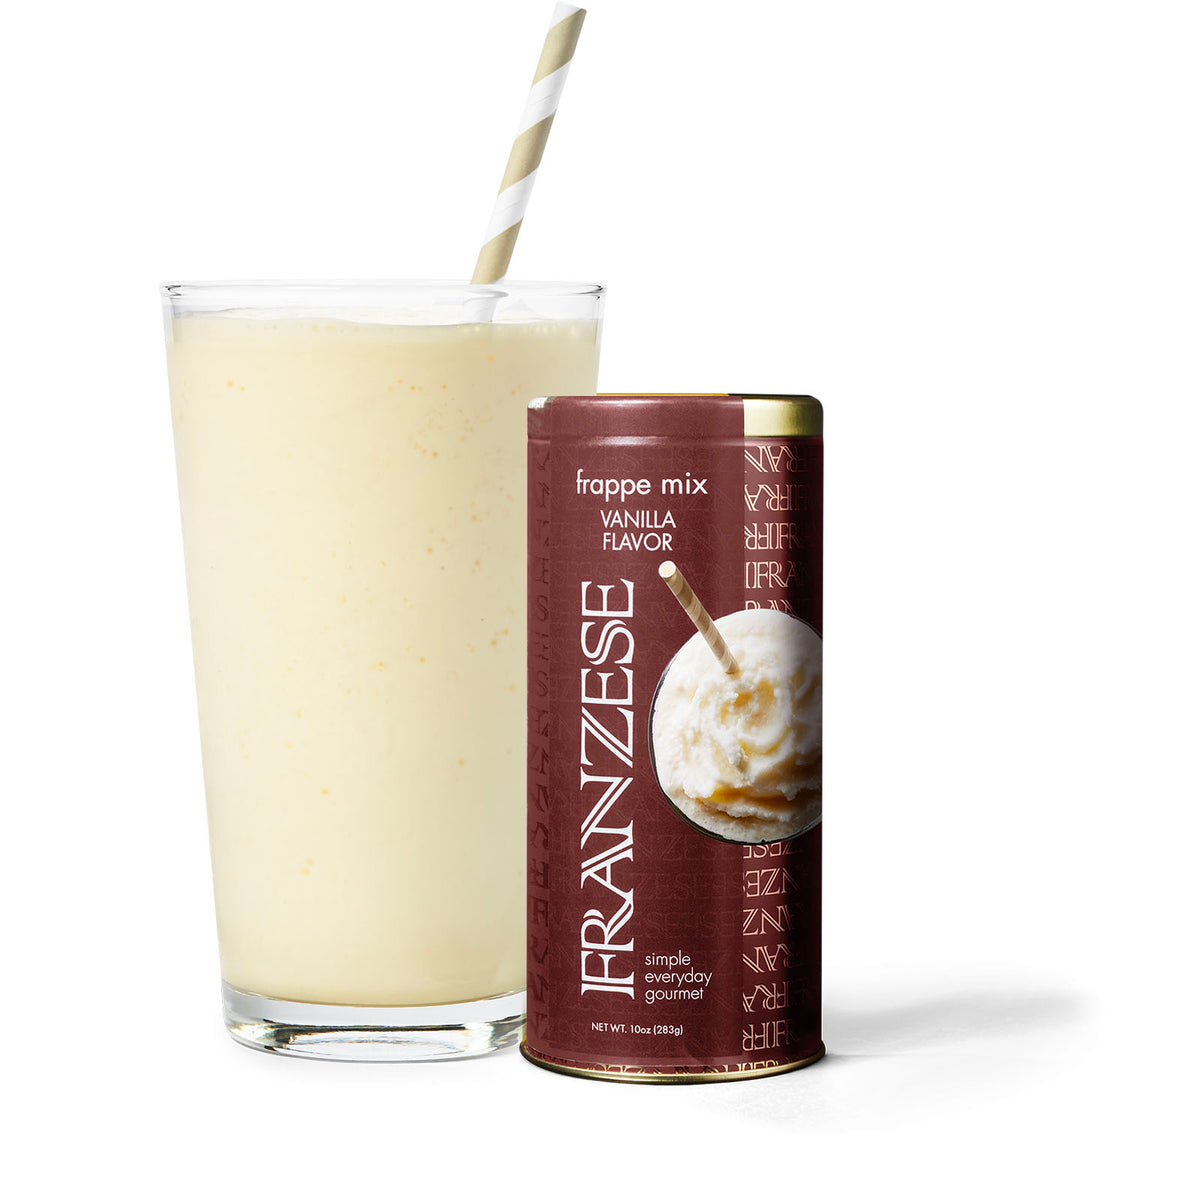 frappe mix collection